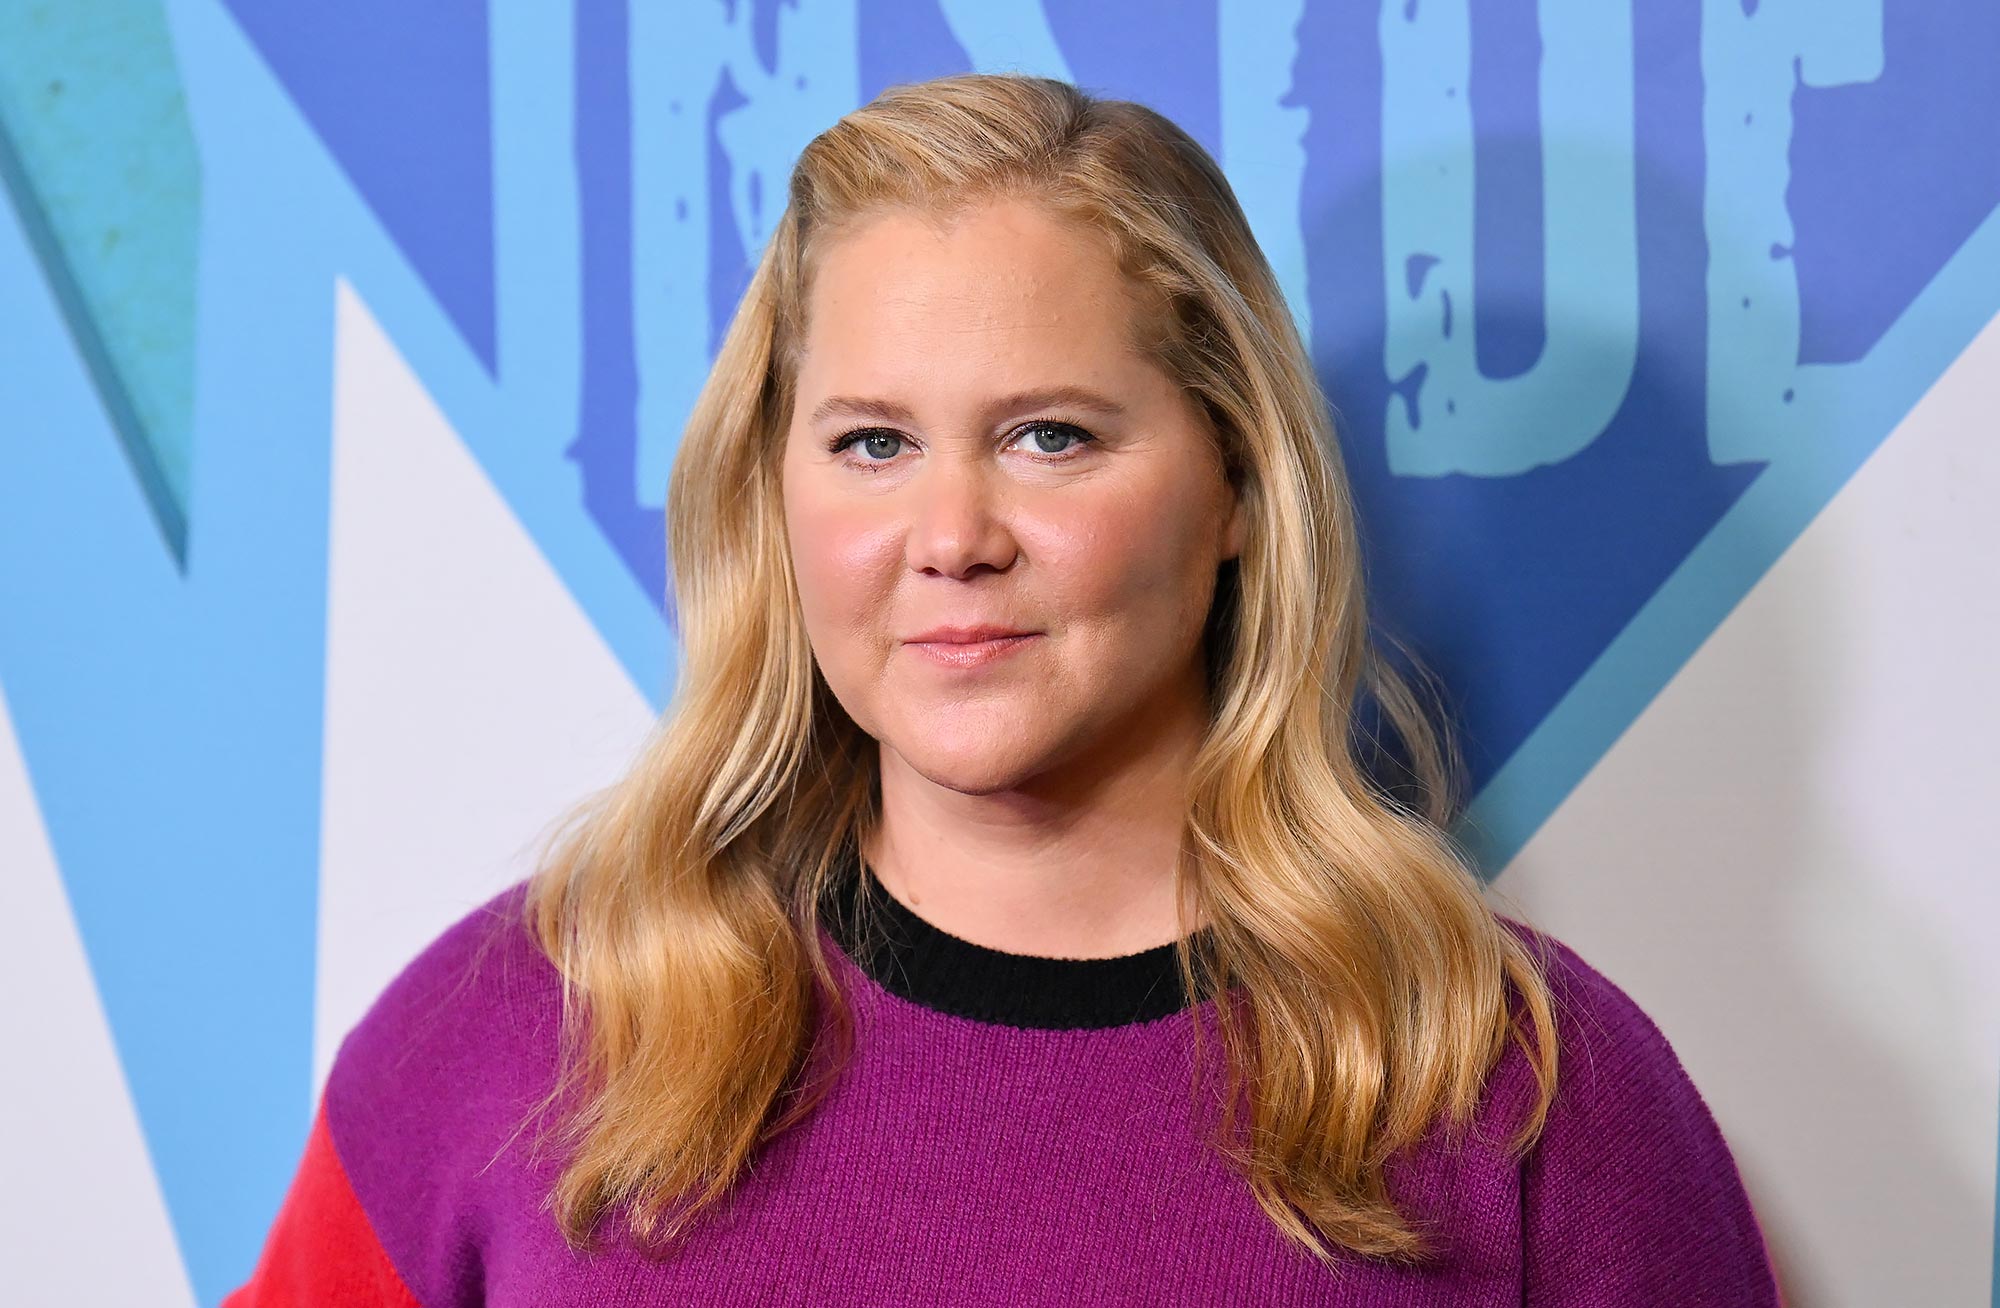 Amy Schumer Says She Had Her Uterus Bronzed After Getting the Organ Removed